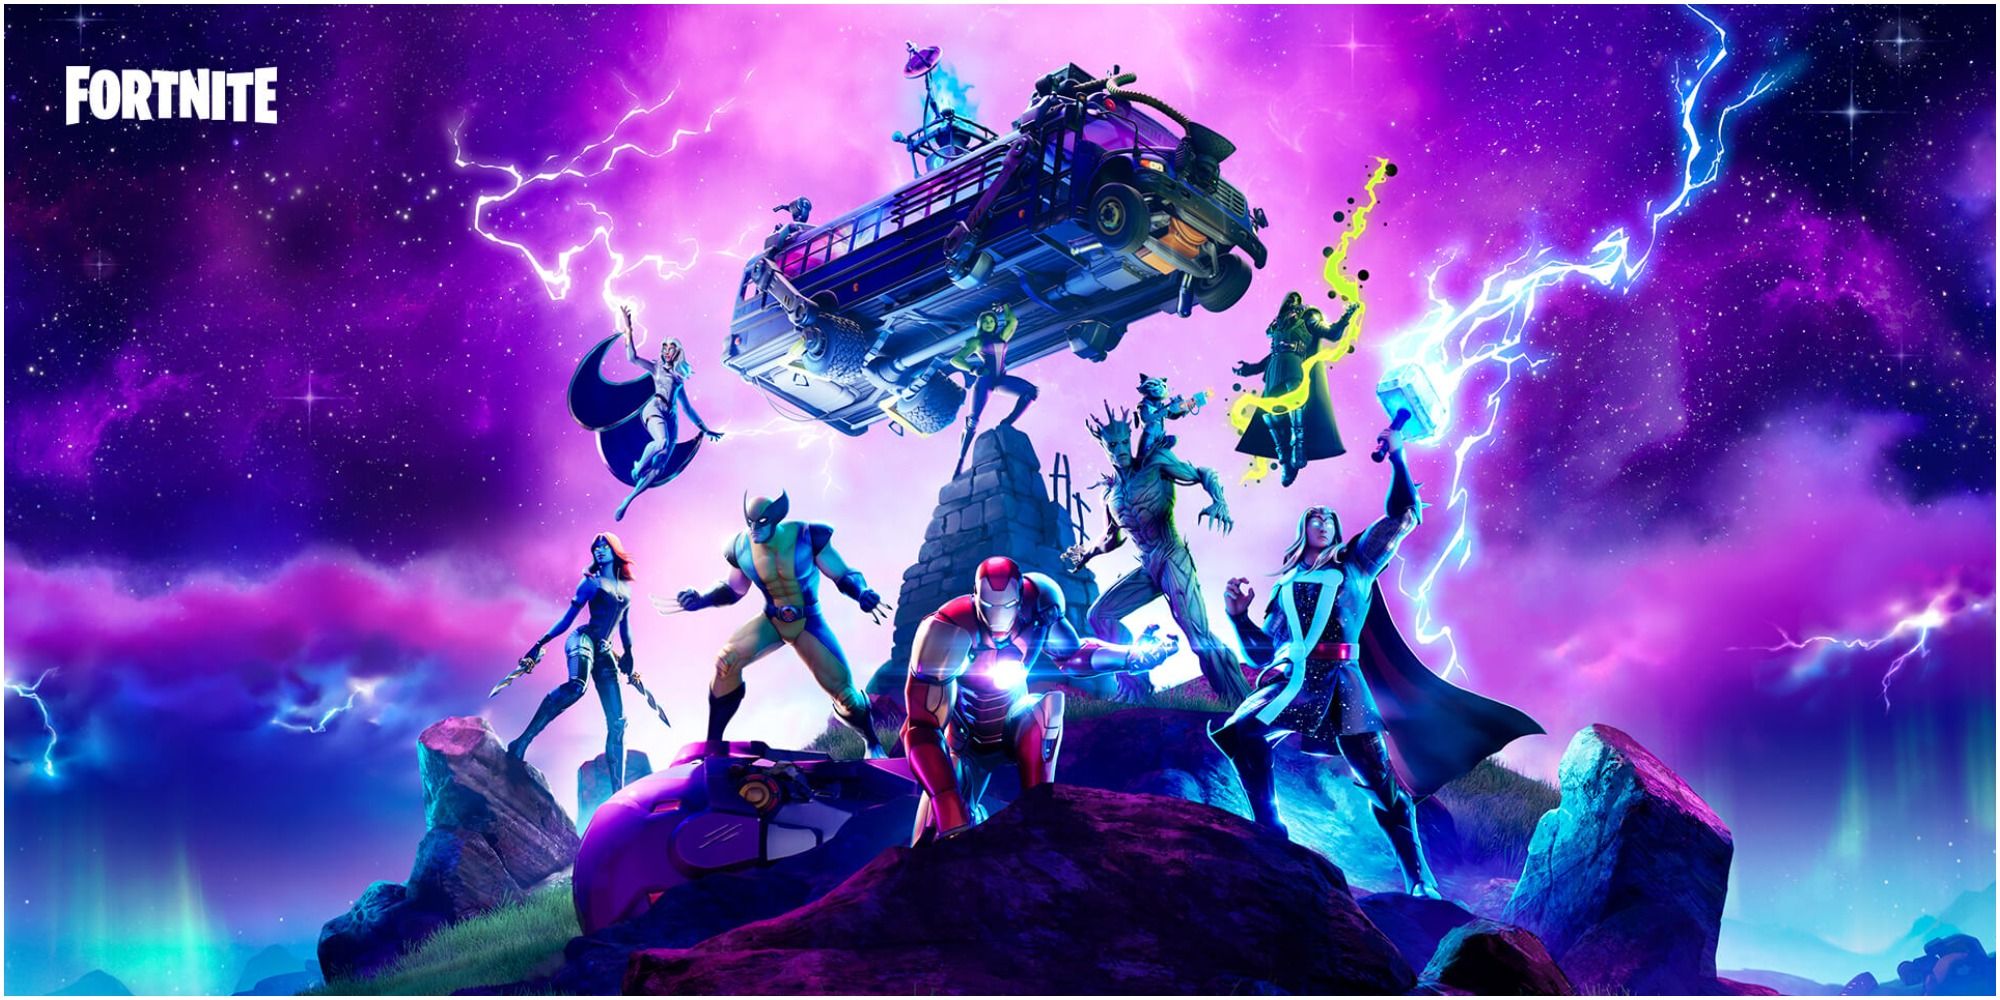 Fortnite with Marvel heroes aligned on hill